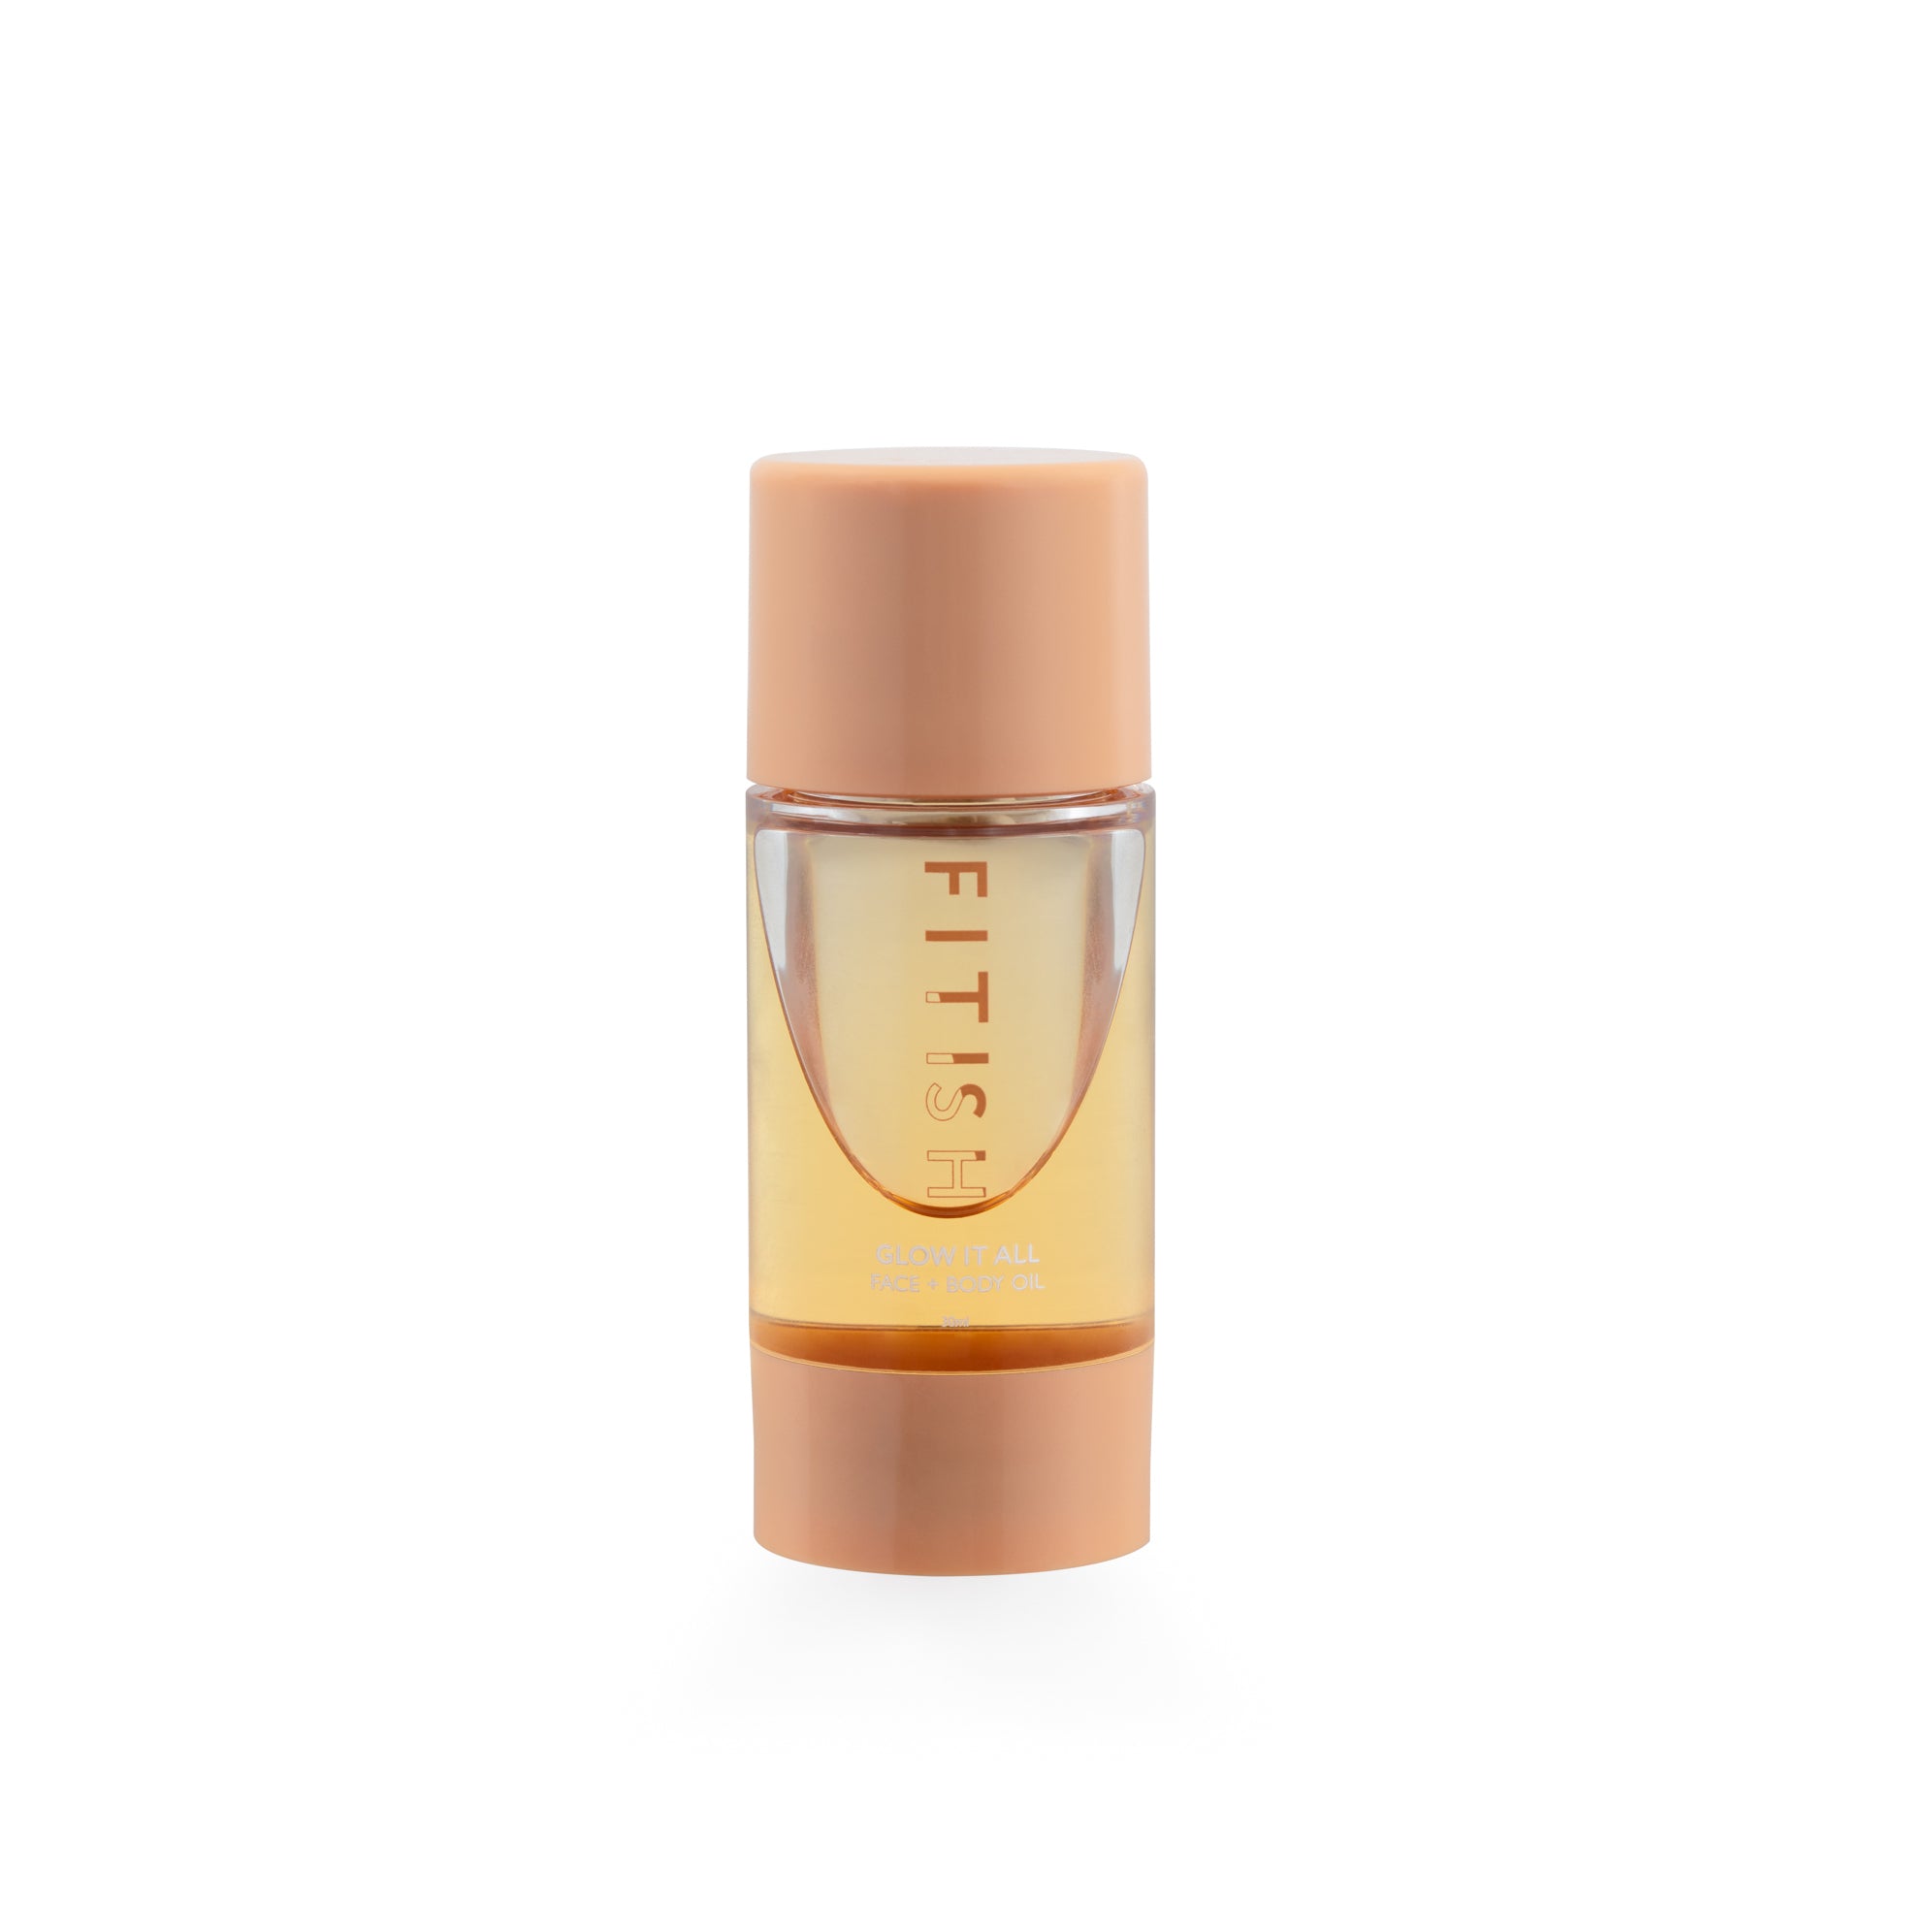 fitish glow it all cbd face and body oil